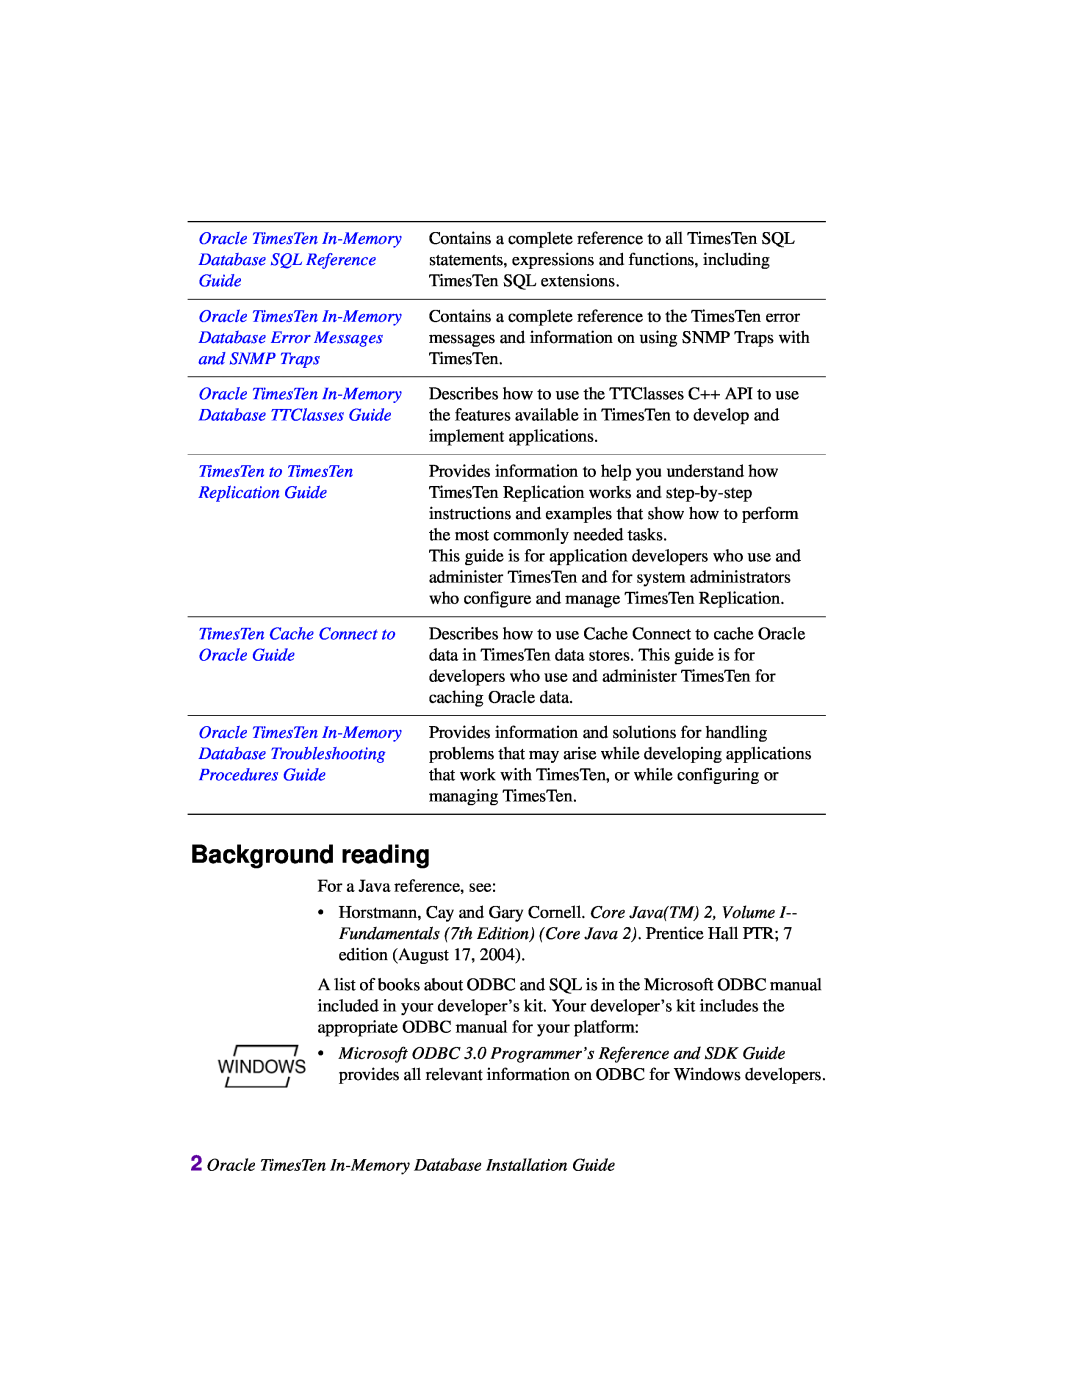 Oracle Audio Technologies B31679-01 manual Background reading 